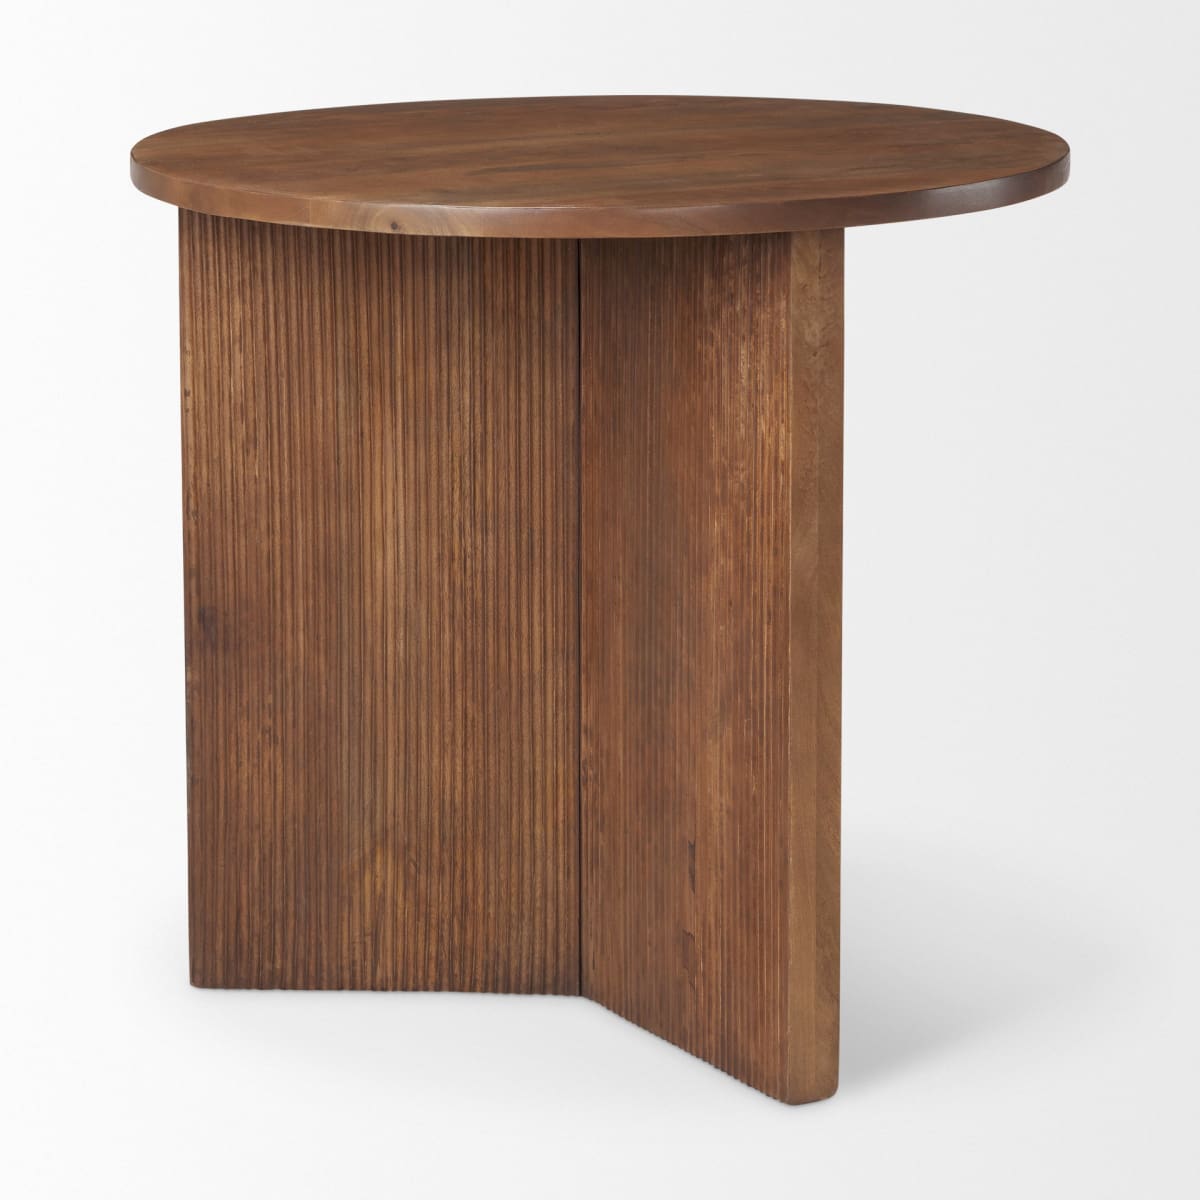 Enzo Accent Table Medium Brown Wood - accent-tables